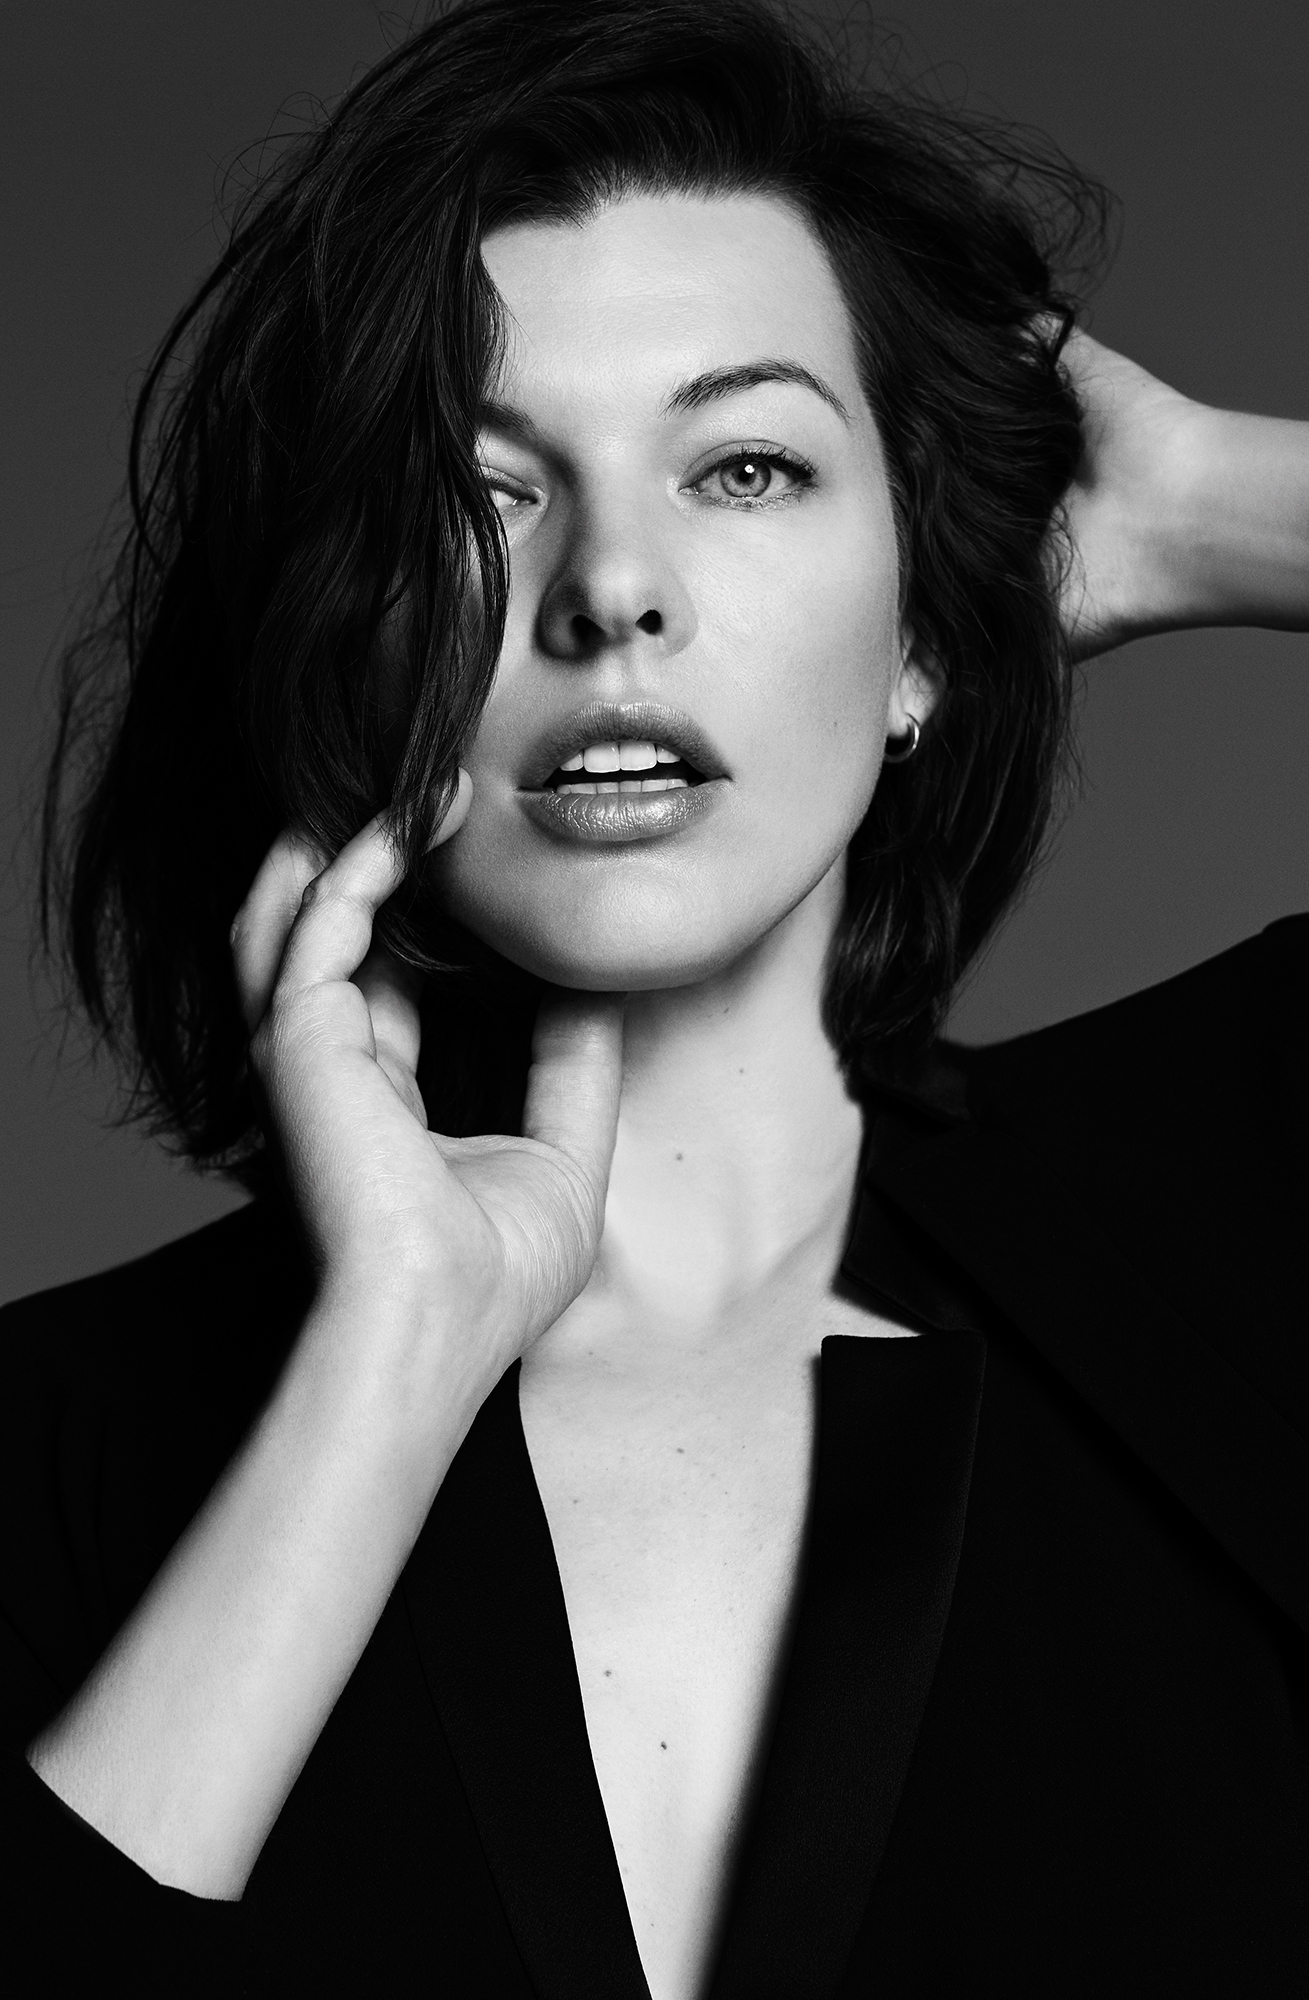 Milla Jovovich Wallpapers Images Photos Pictures Backgrounds